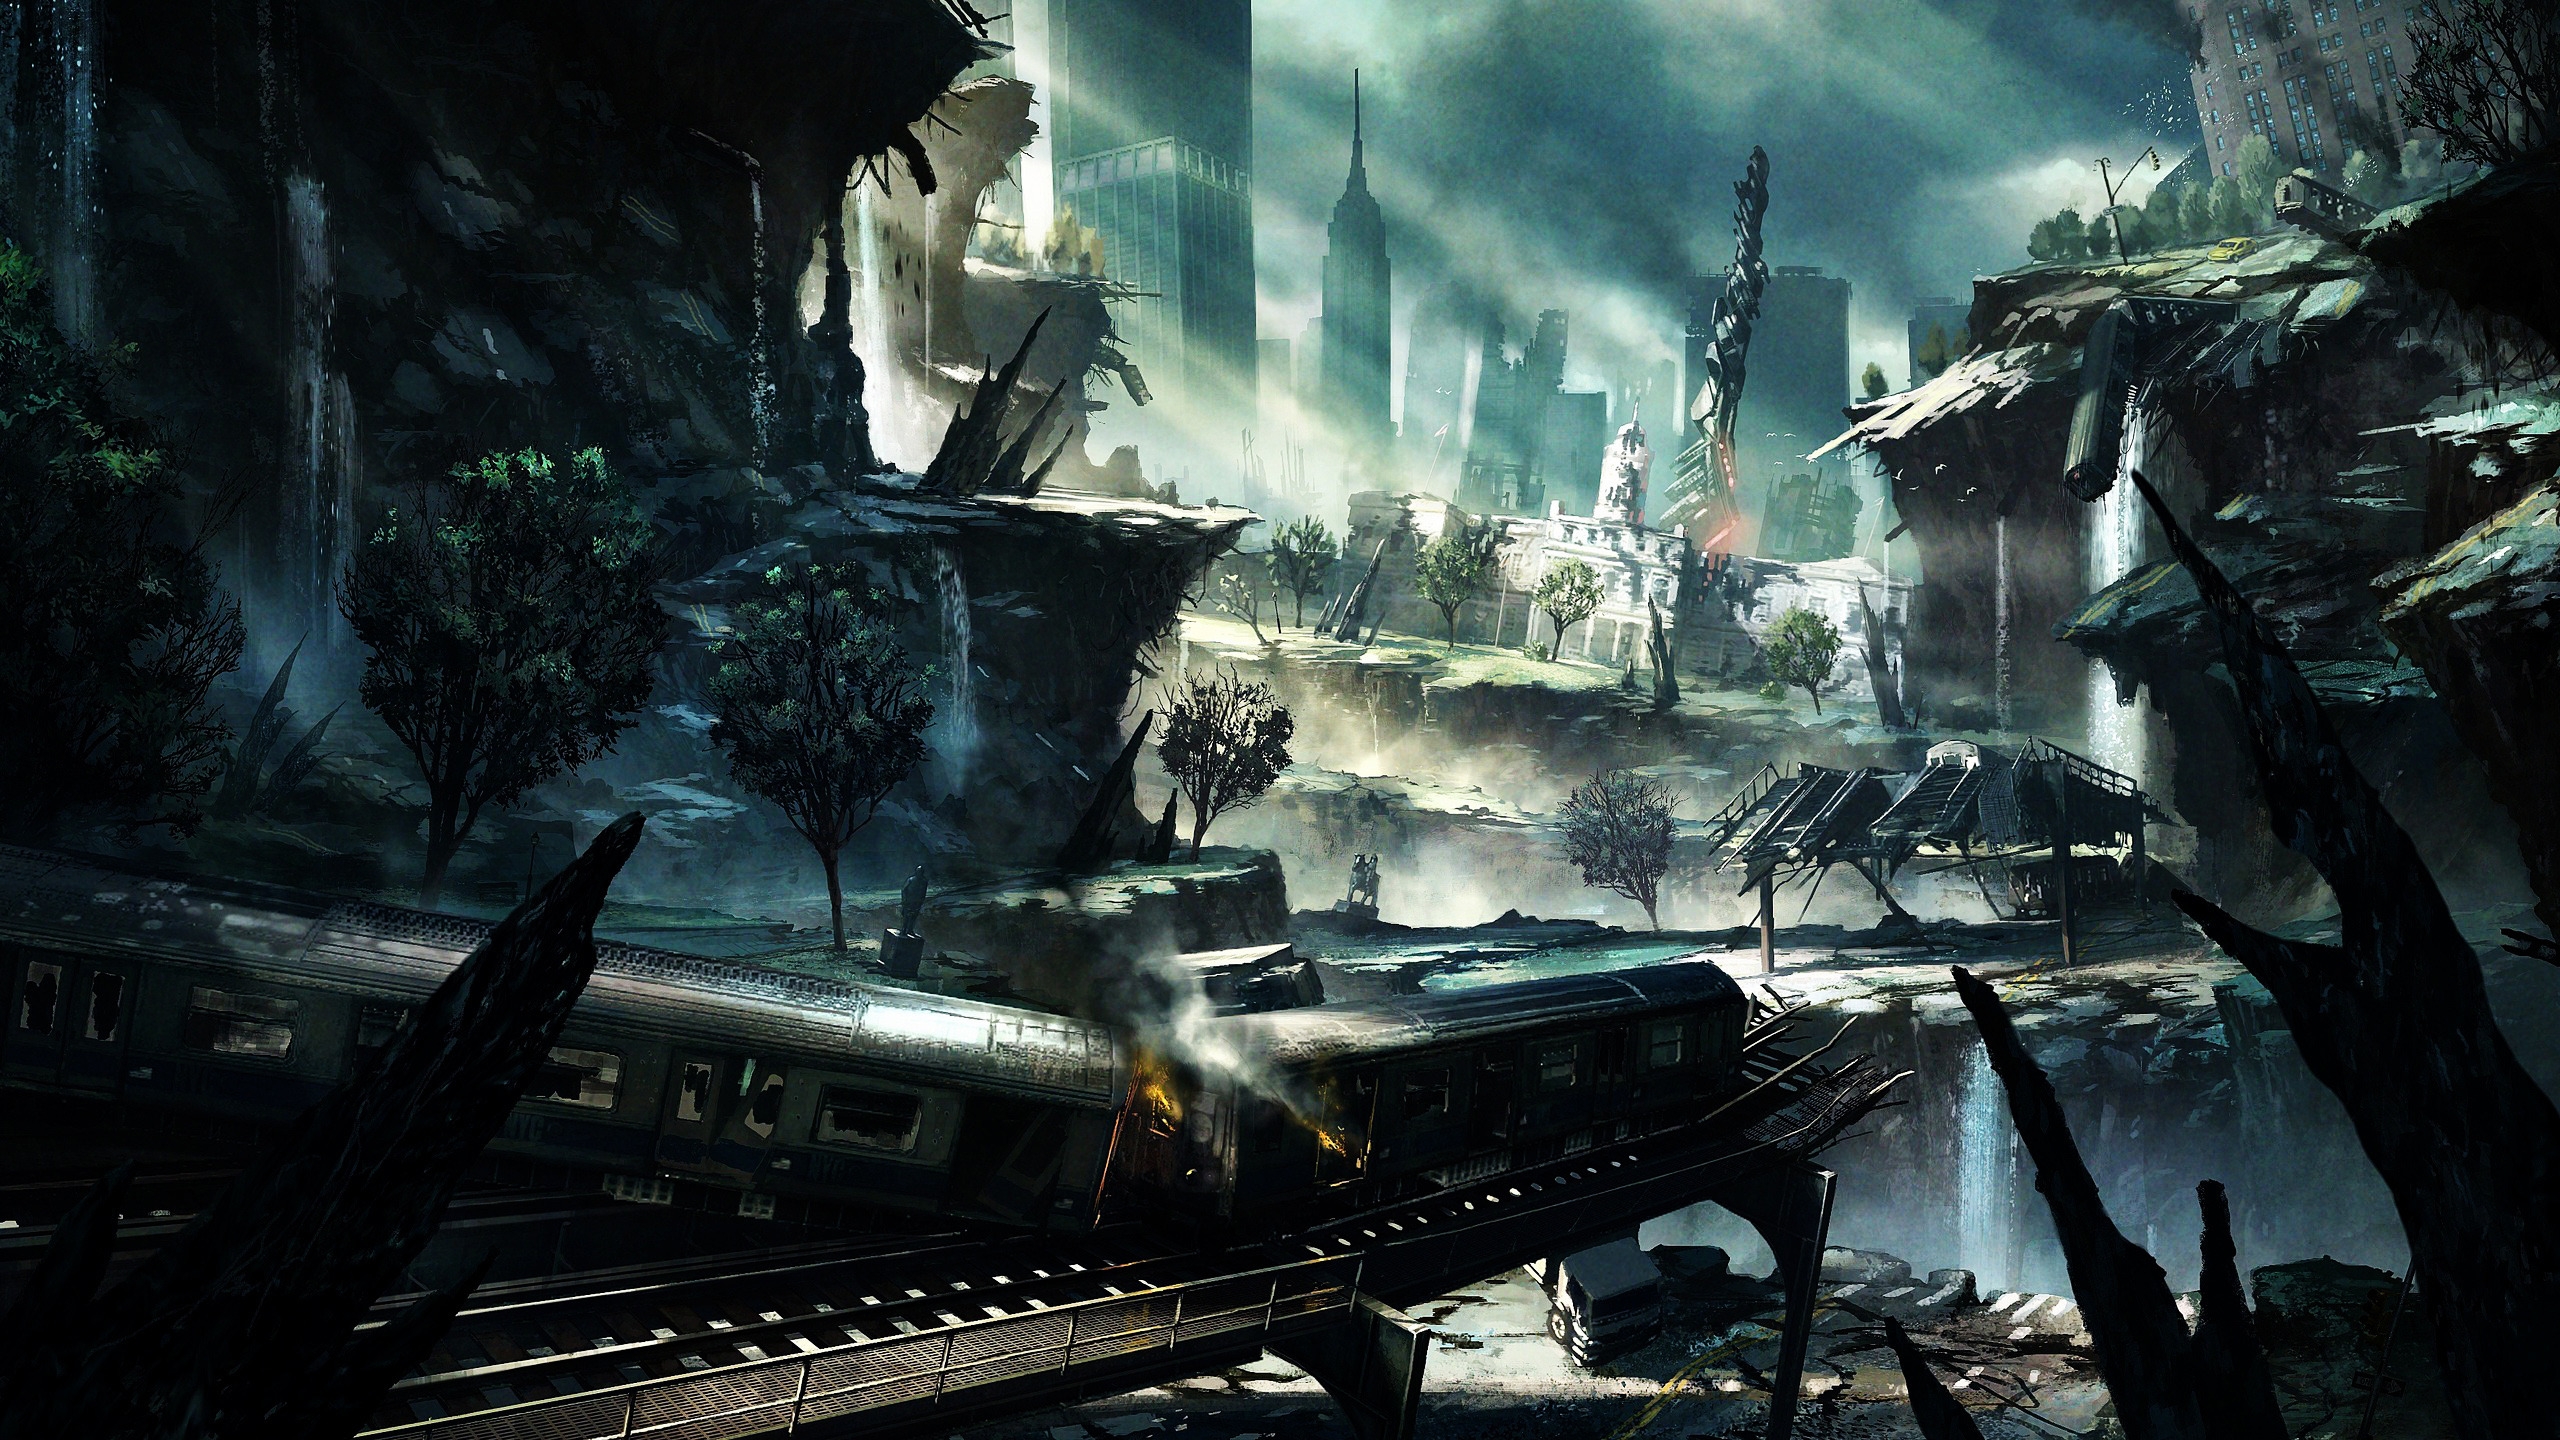 Crysis 2 Poster for 2560x1440 HDTV resolution